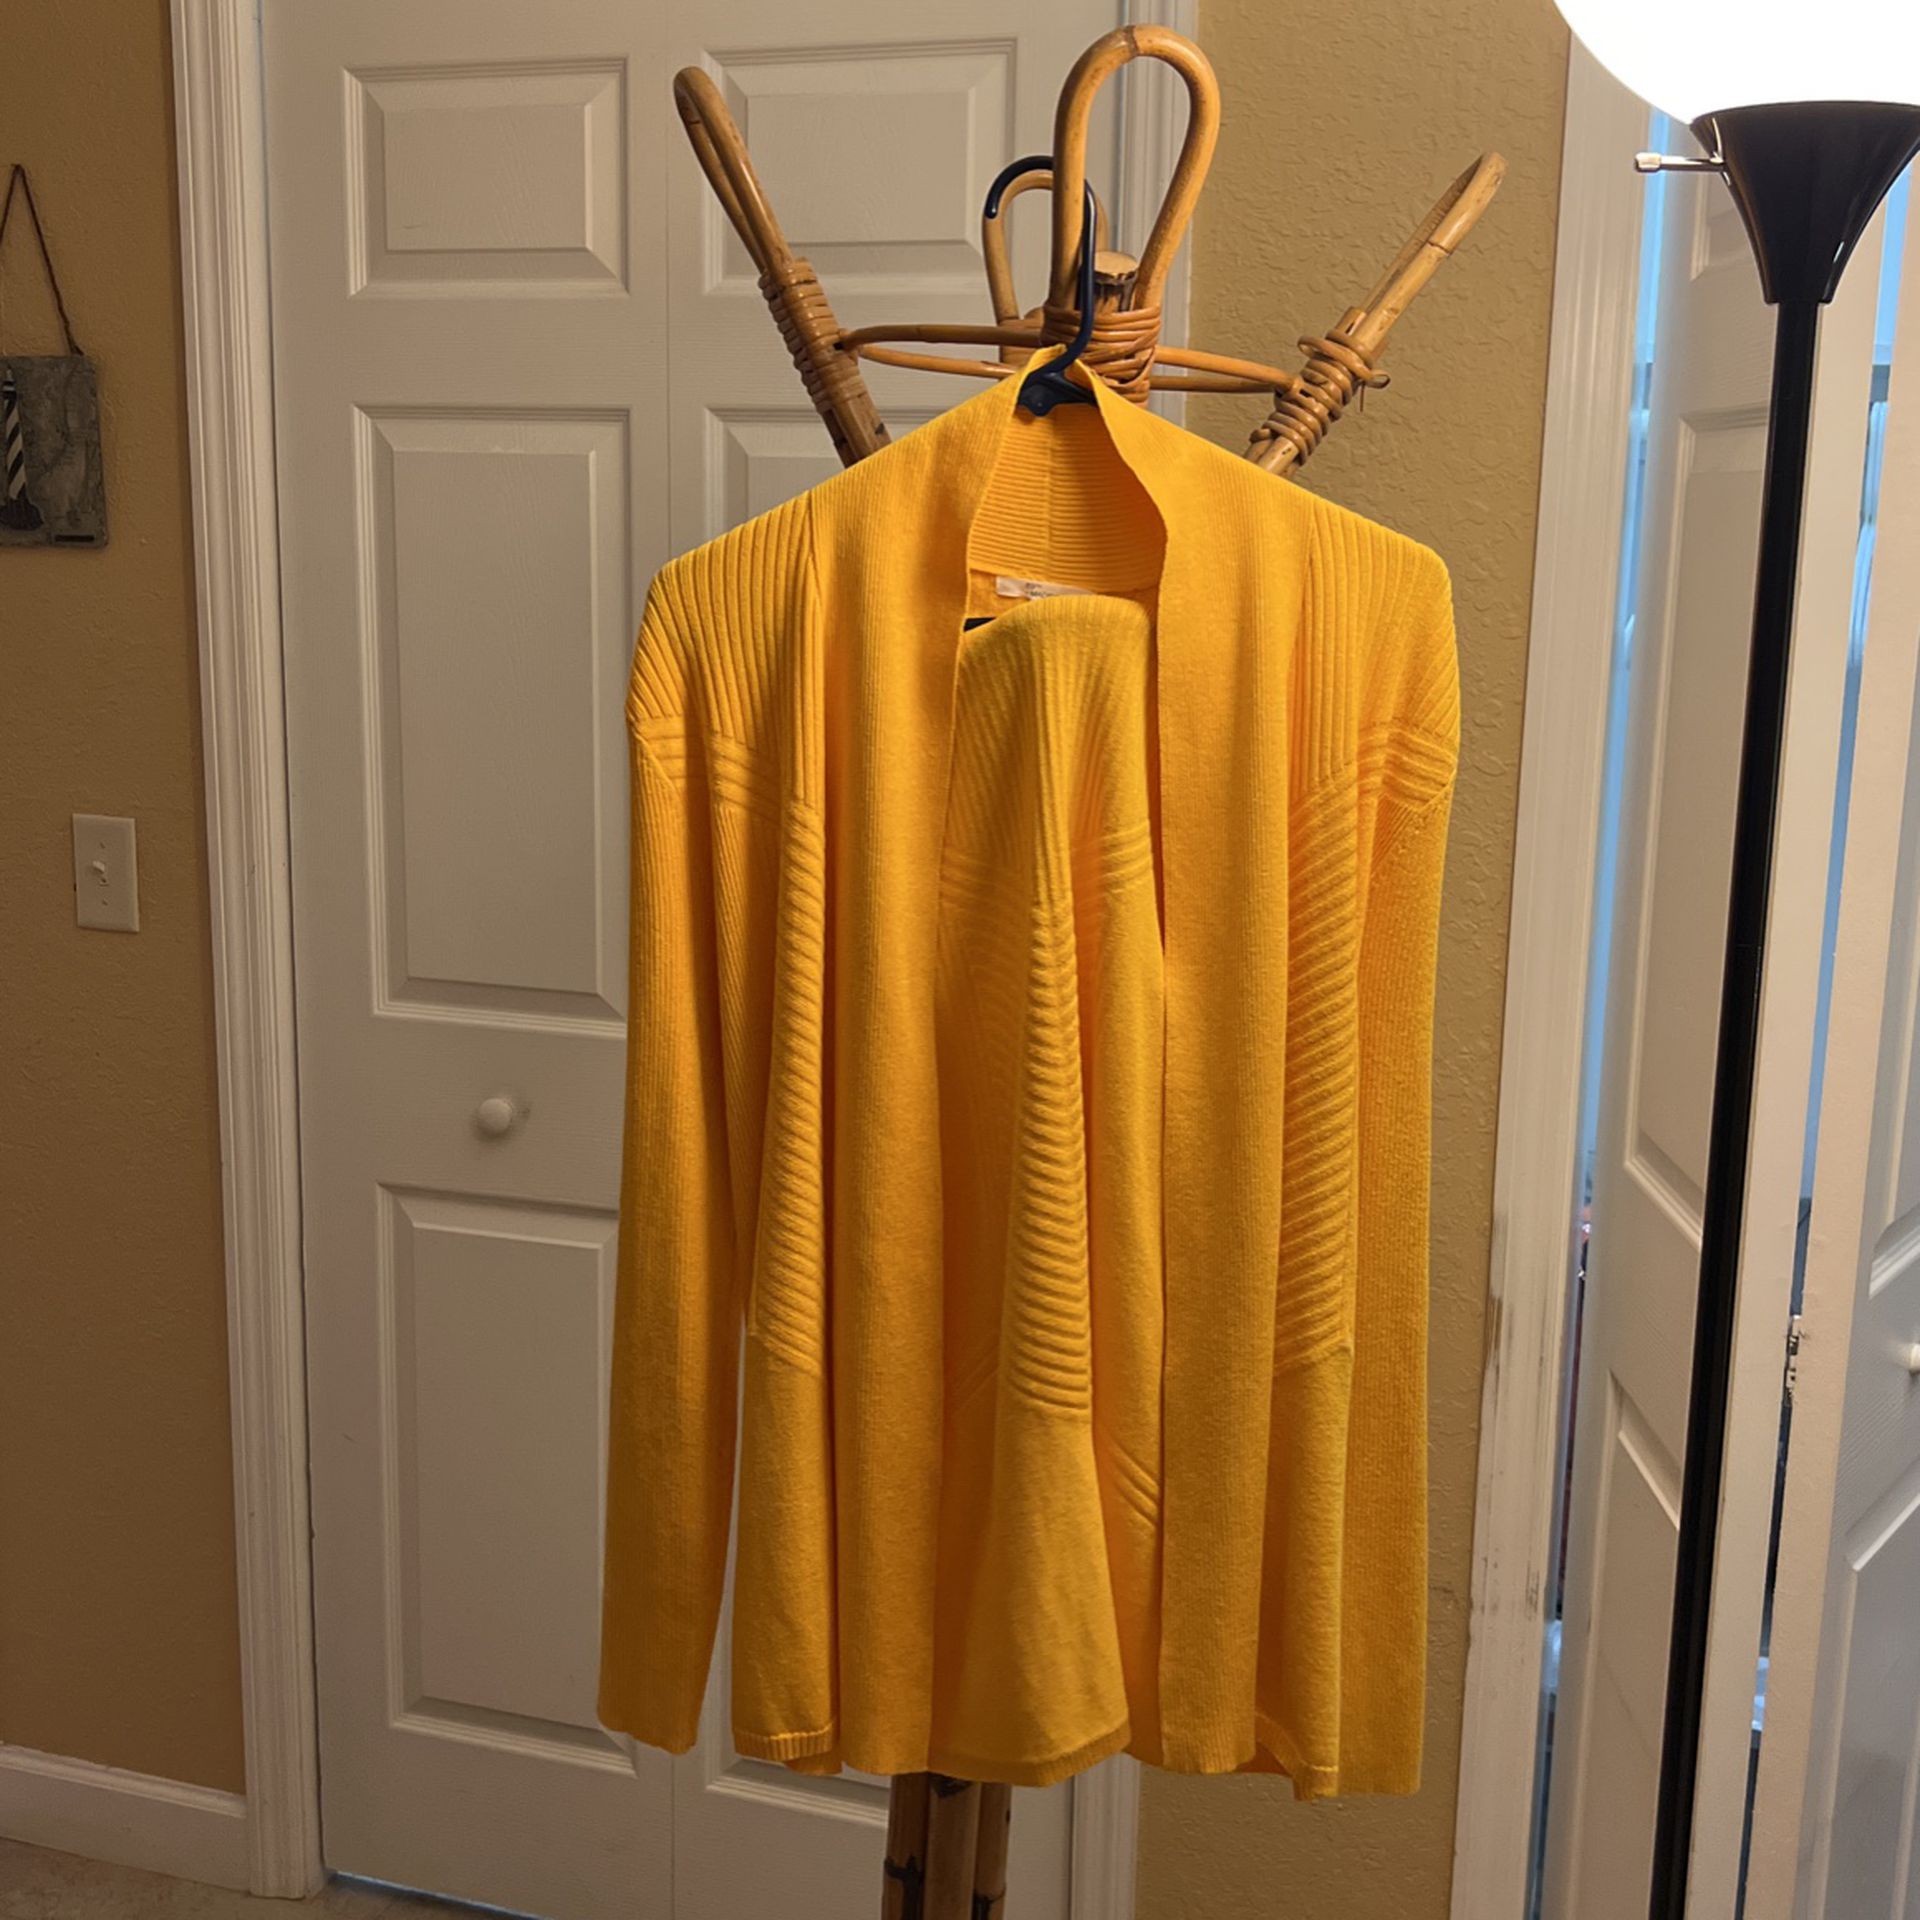 women's shawl, yellow color, size L, cost $4